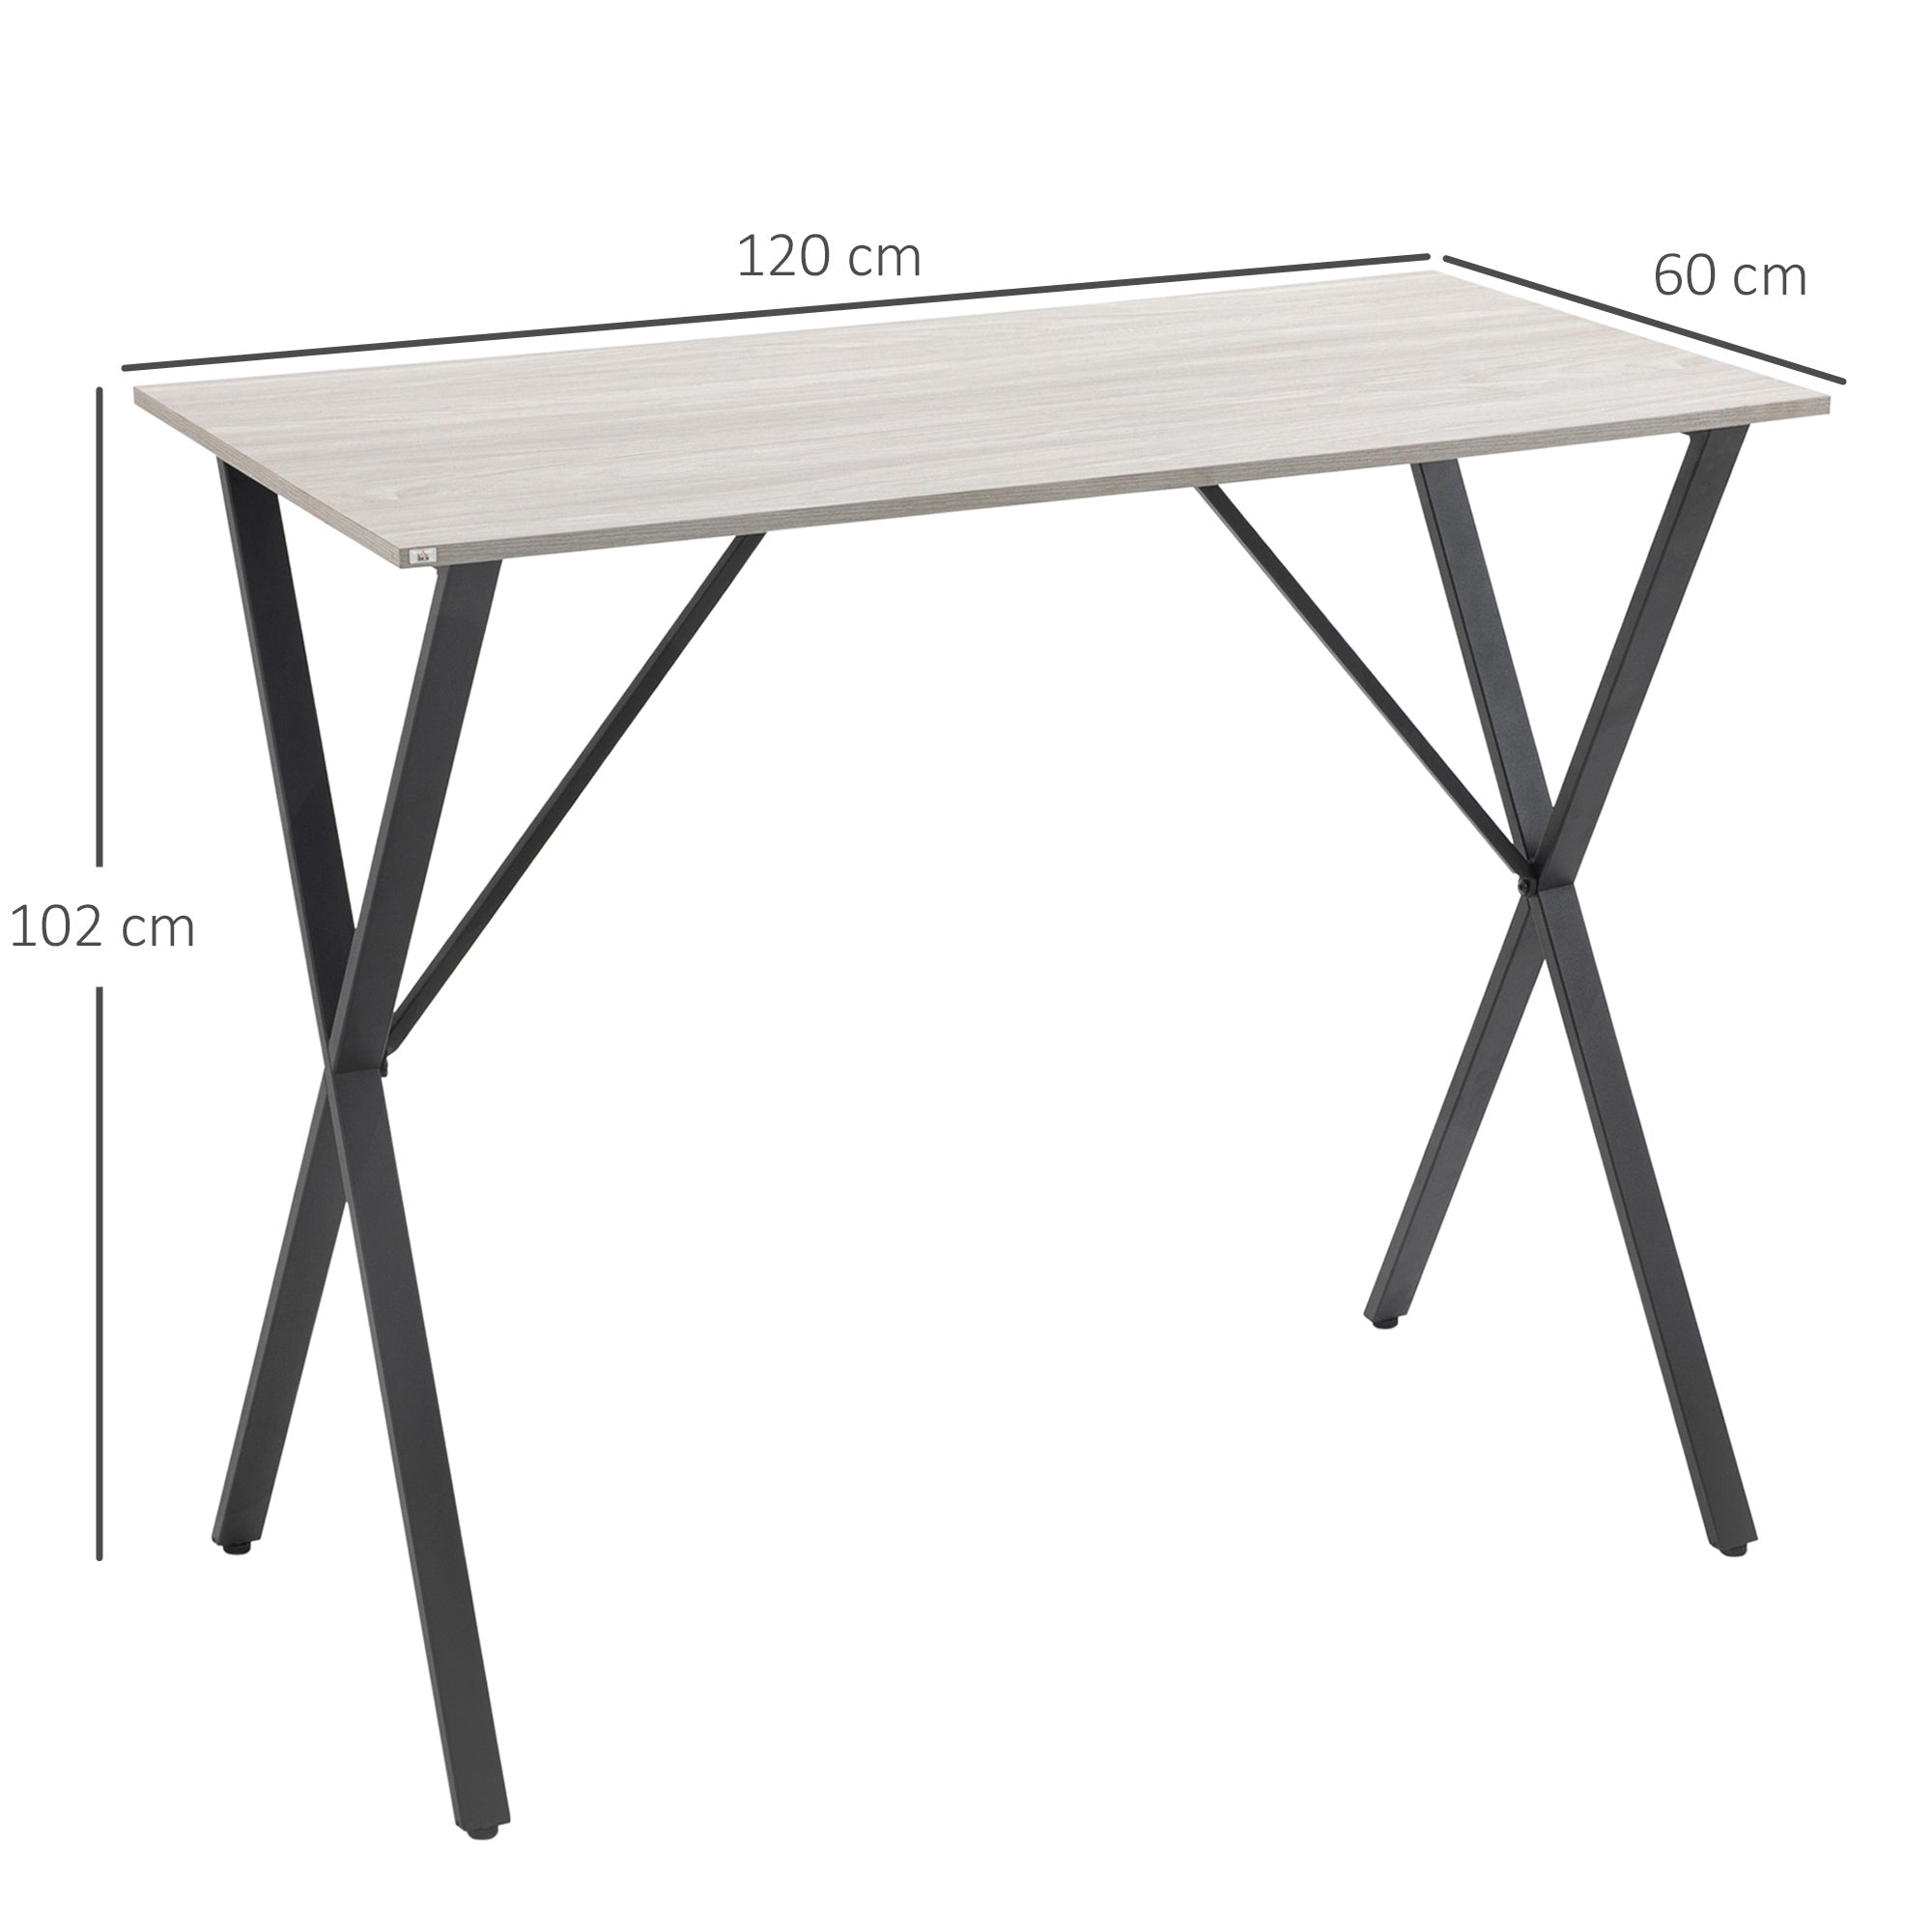 HOMCOM 120 cm Rectangular Bar Table for 4 People, Modern Kitchen Table with Marble Effect Tabletop, Steel Legs, for Living Room, Home Bar, White